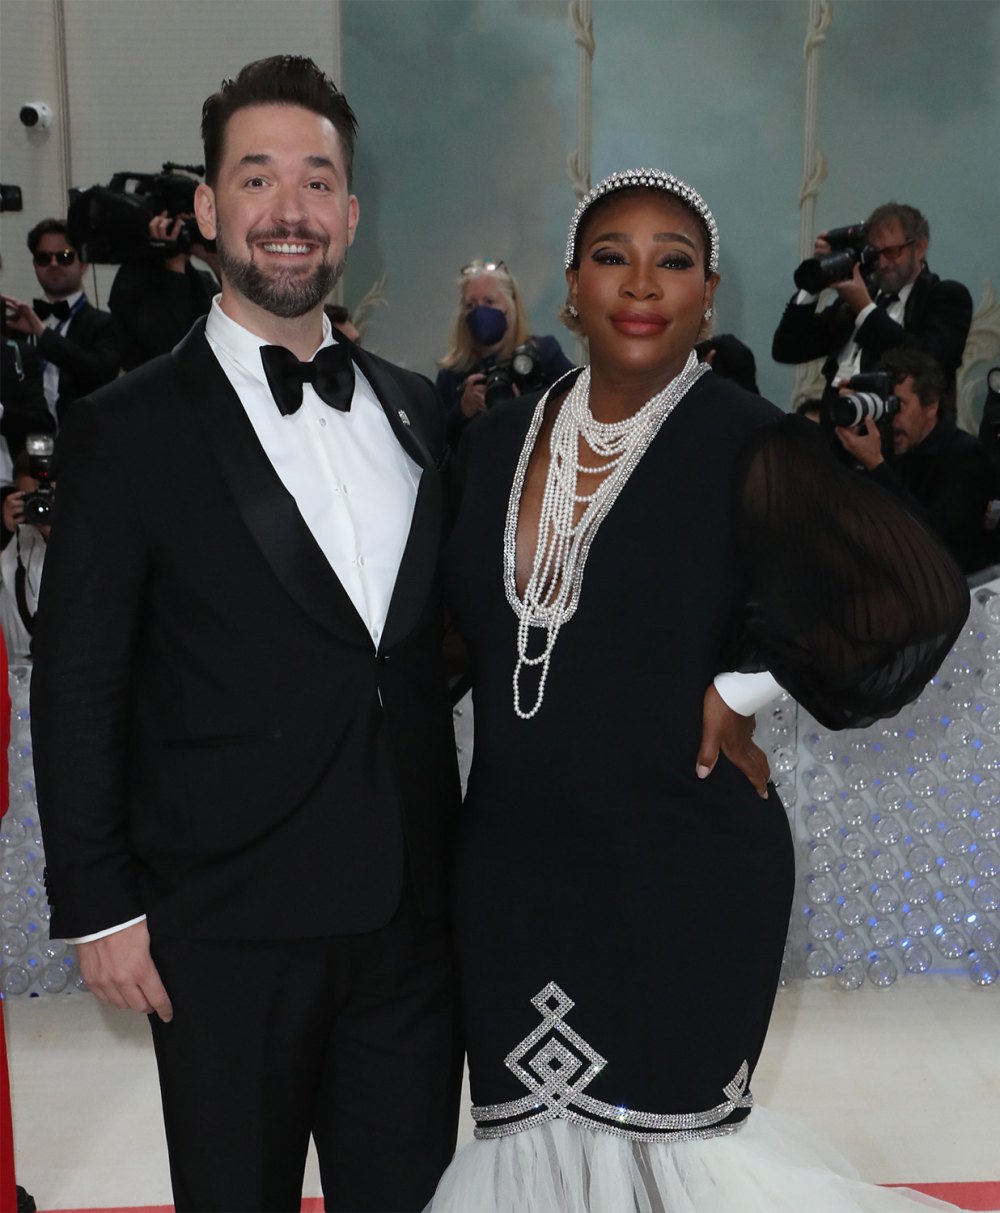 Serena Williams Gives Birth, Welcomes Baby No. 2 With Husband Alexis Ohanian